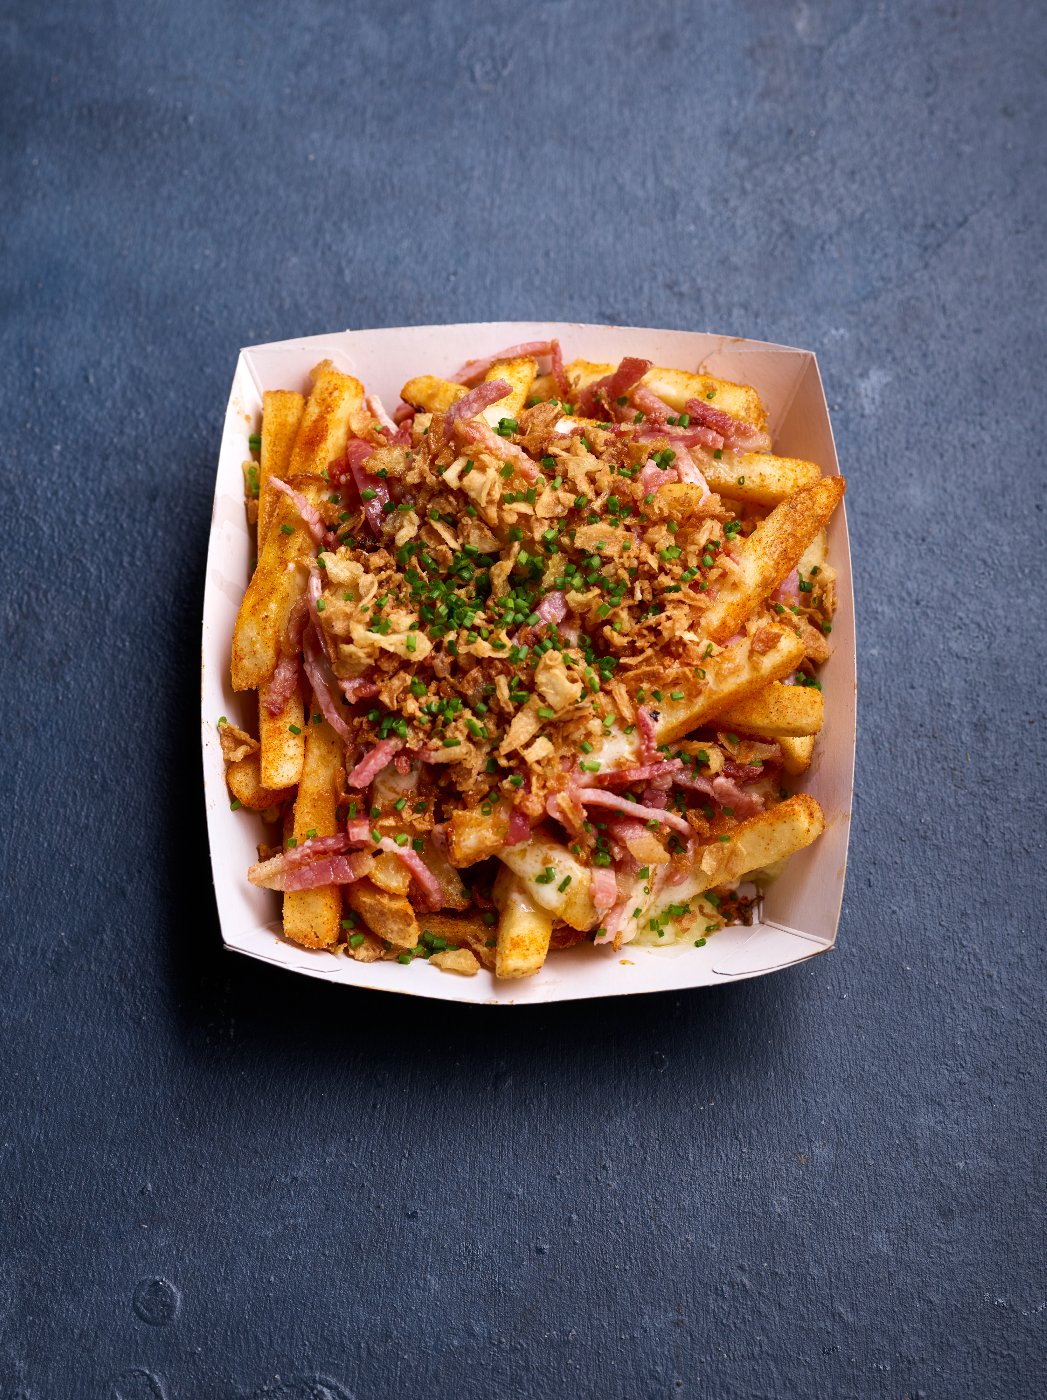 Dirty loaded fries, cheese sauce, bacon, crispy onion, chives